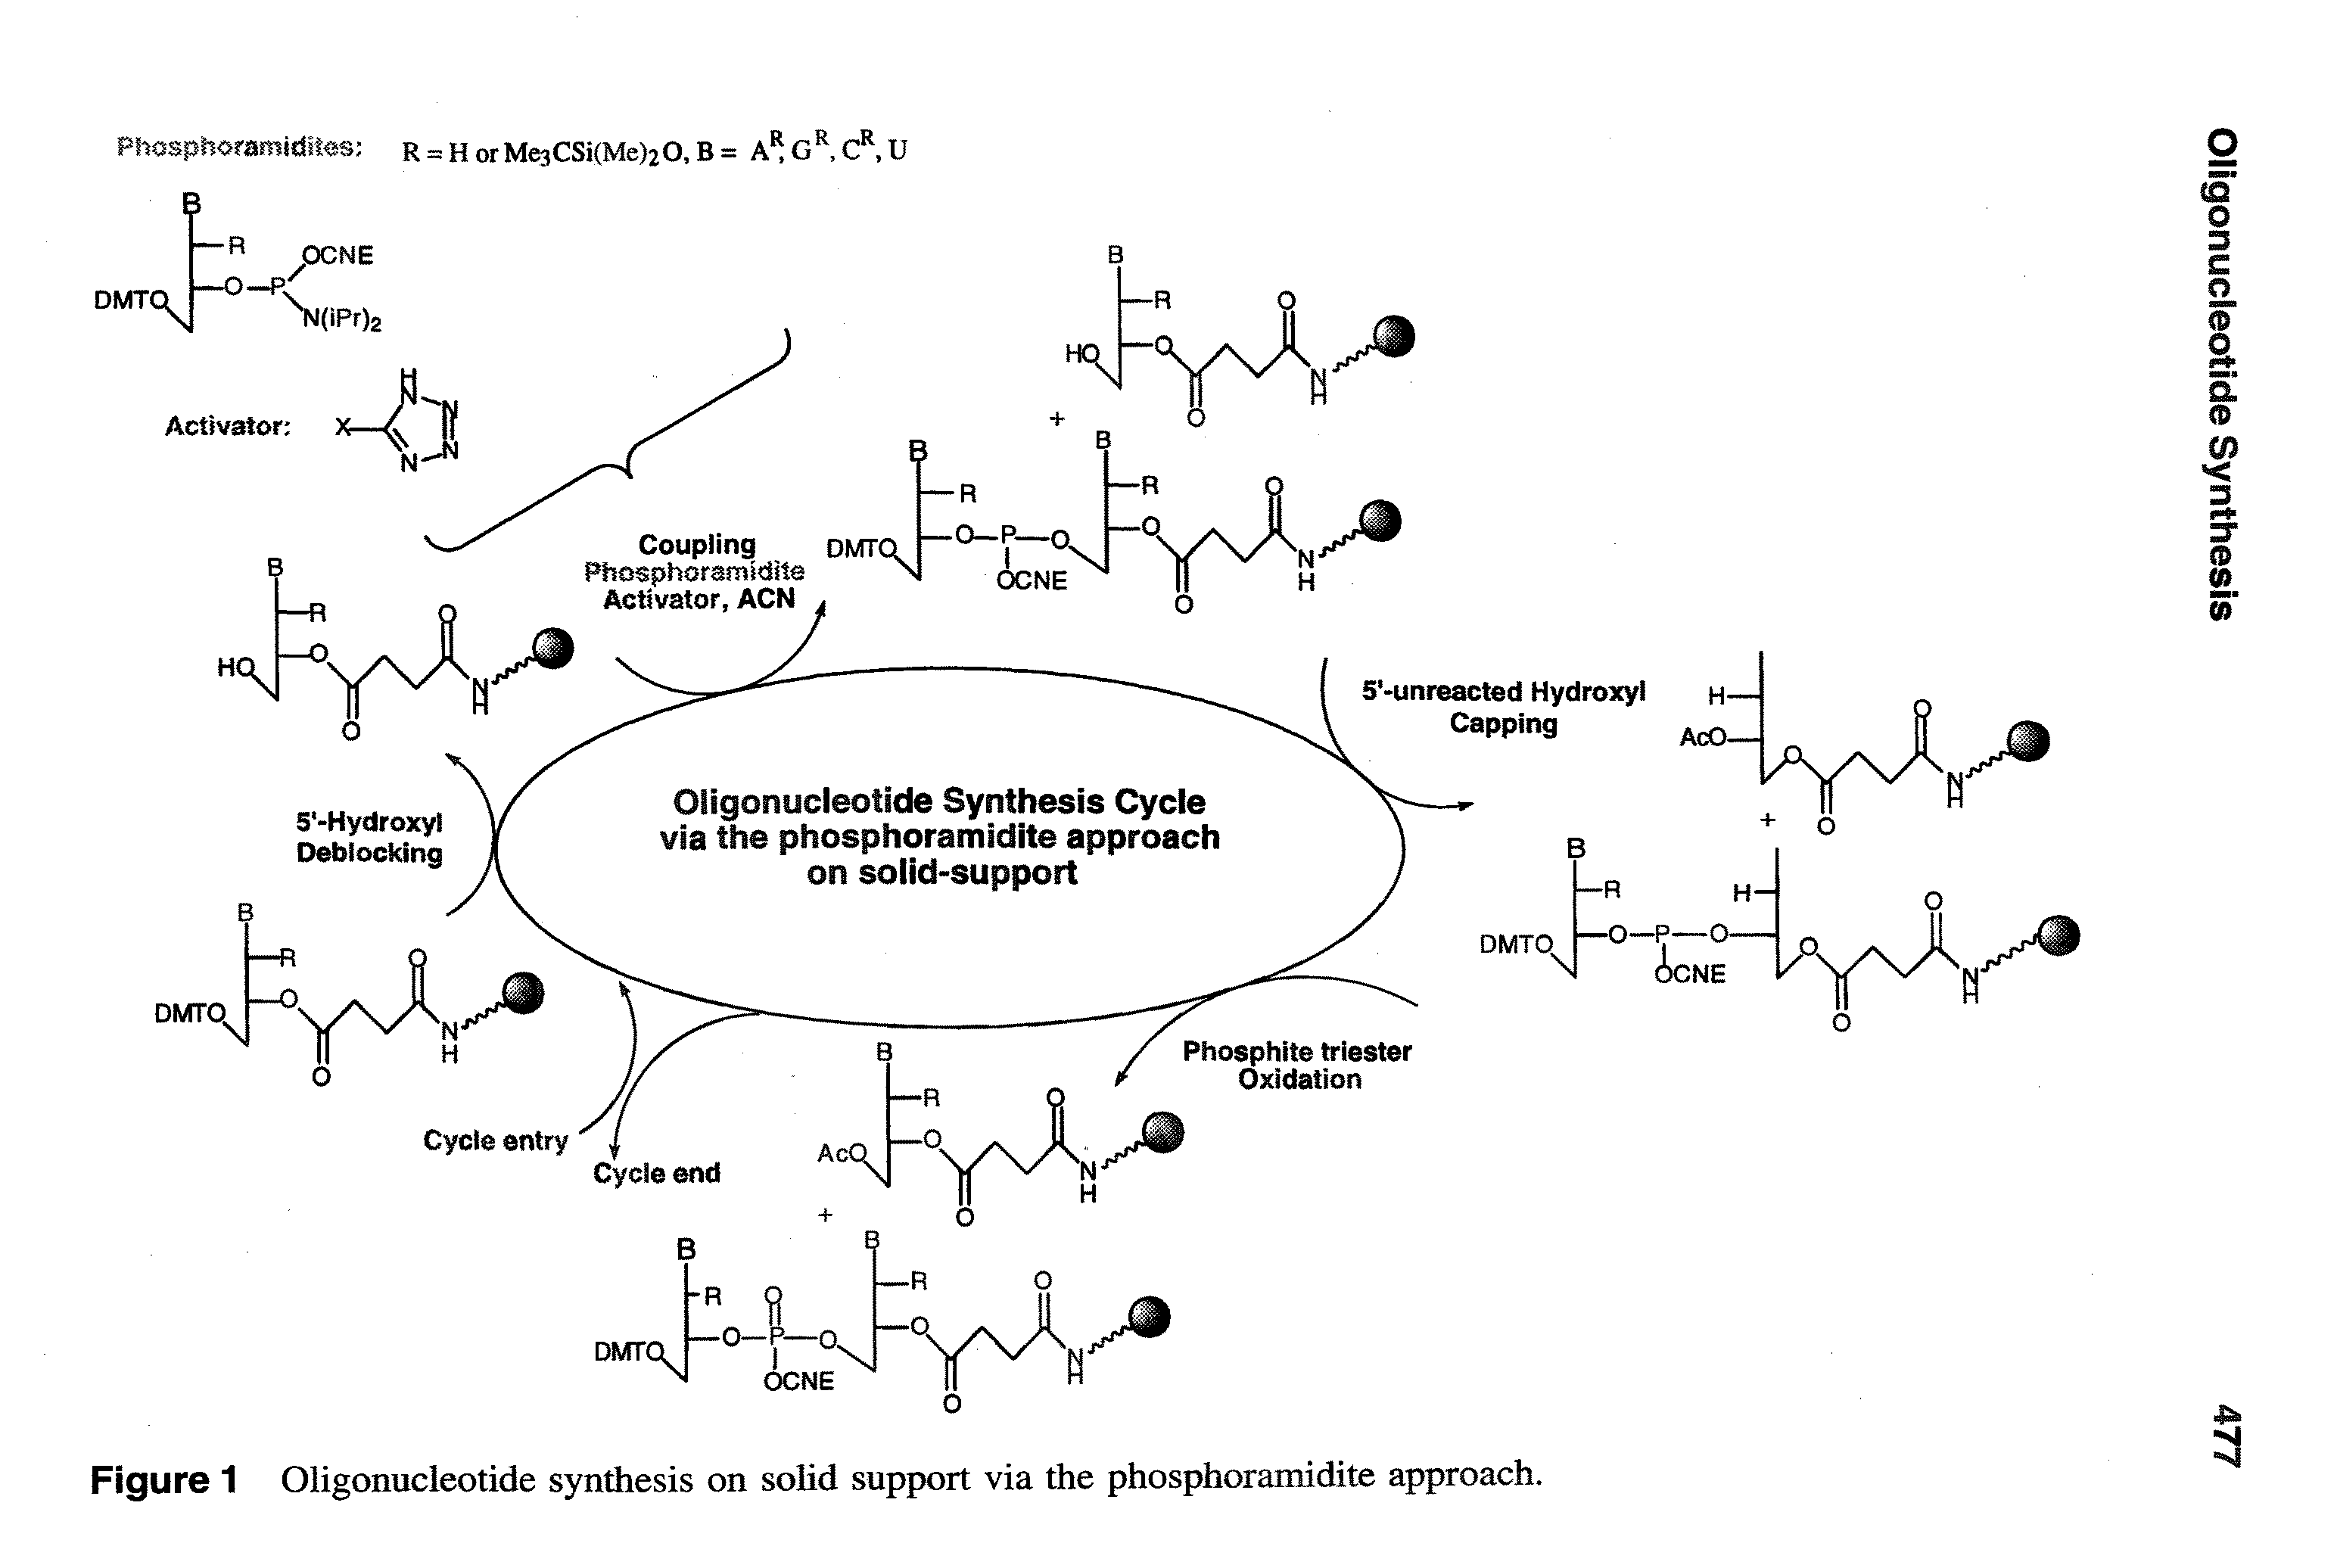 Figure 1 Oligonucleotide synthesis on solid support via the phosphoramidite approach.